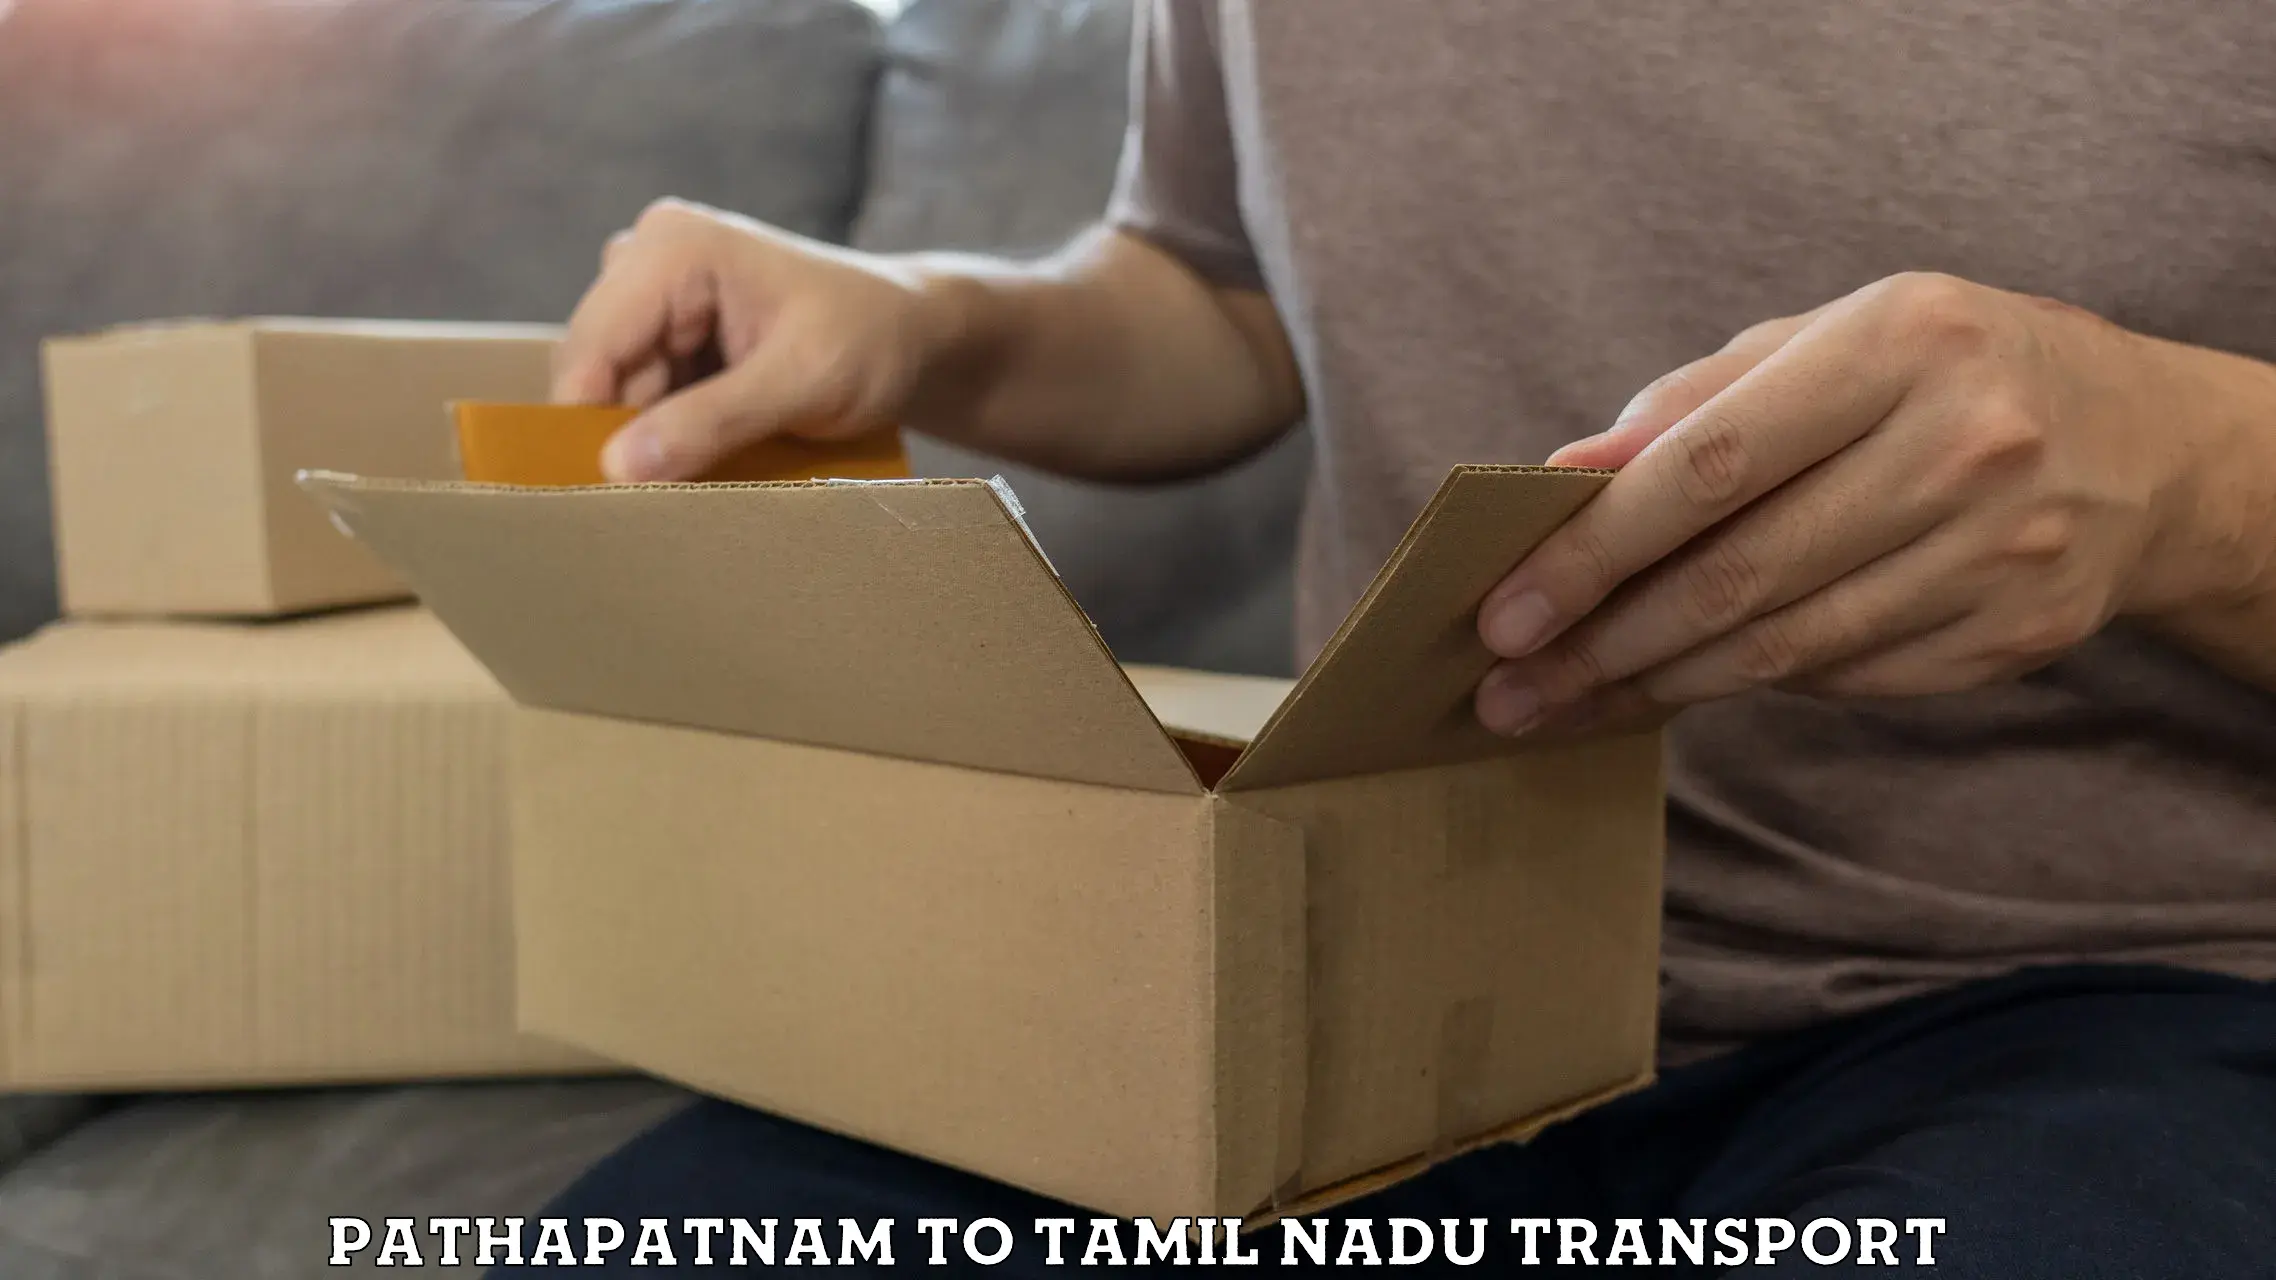 Delivery service Pathapatnam to Tamil Nadu